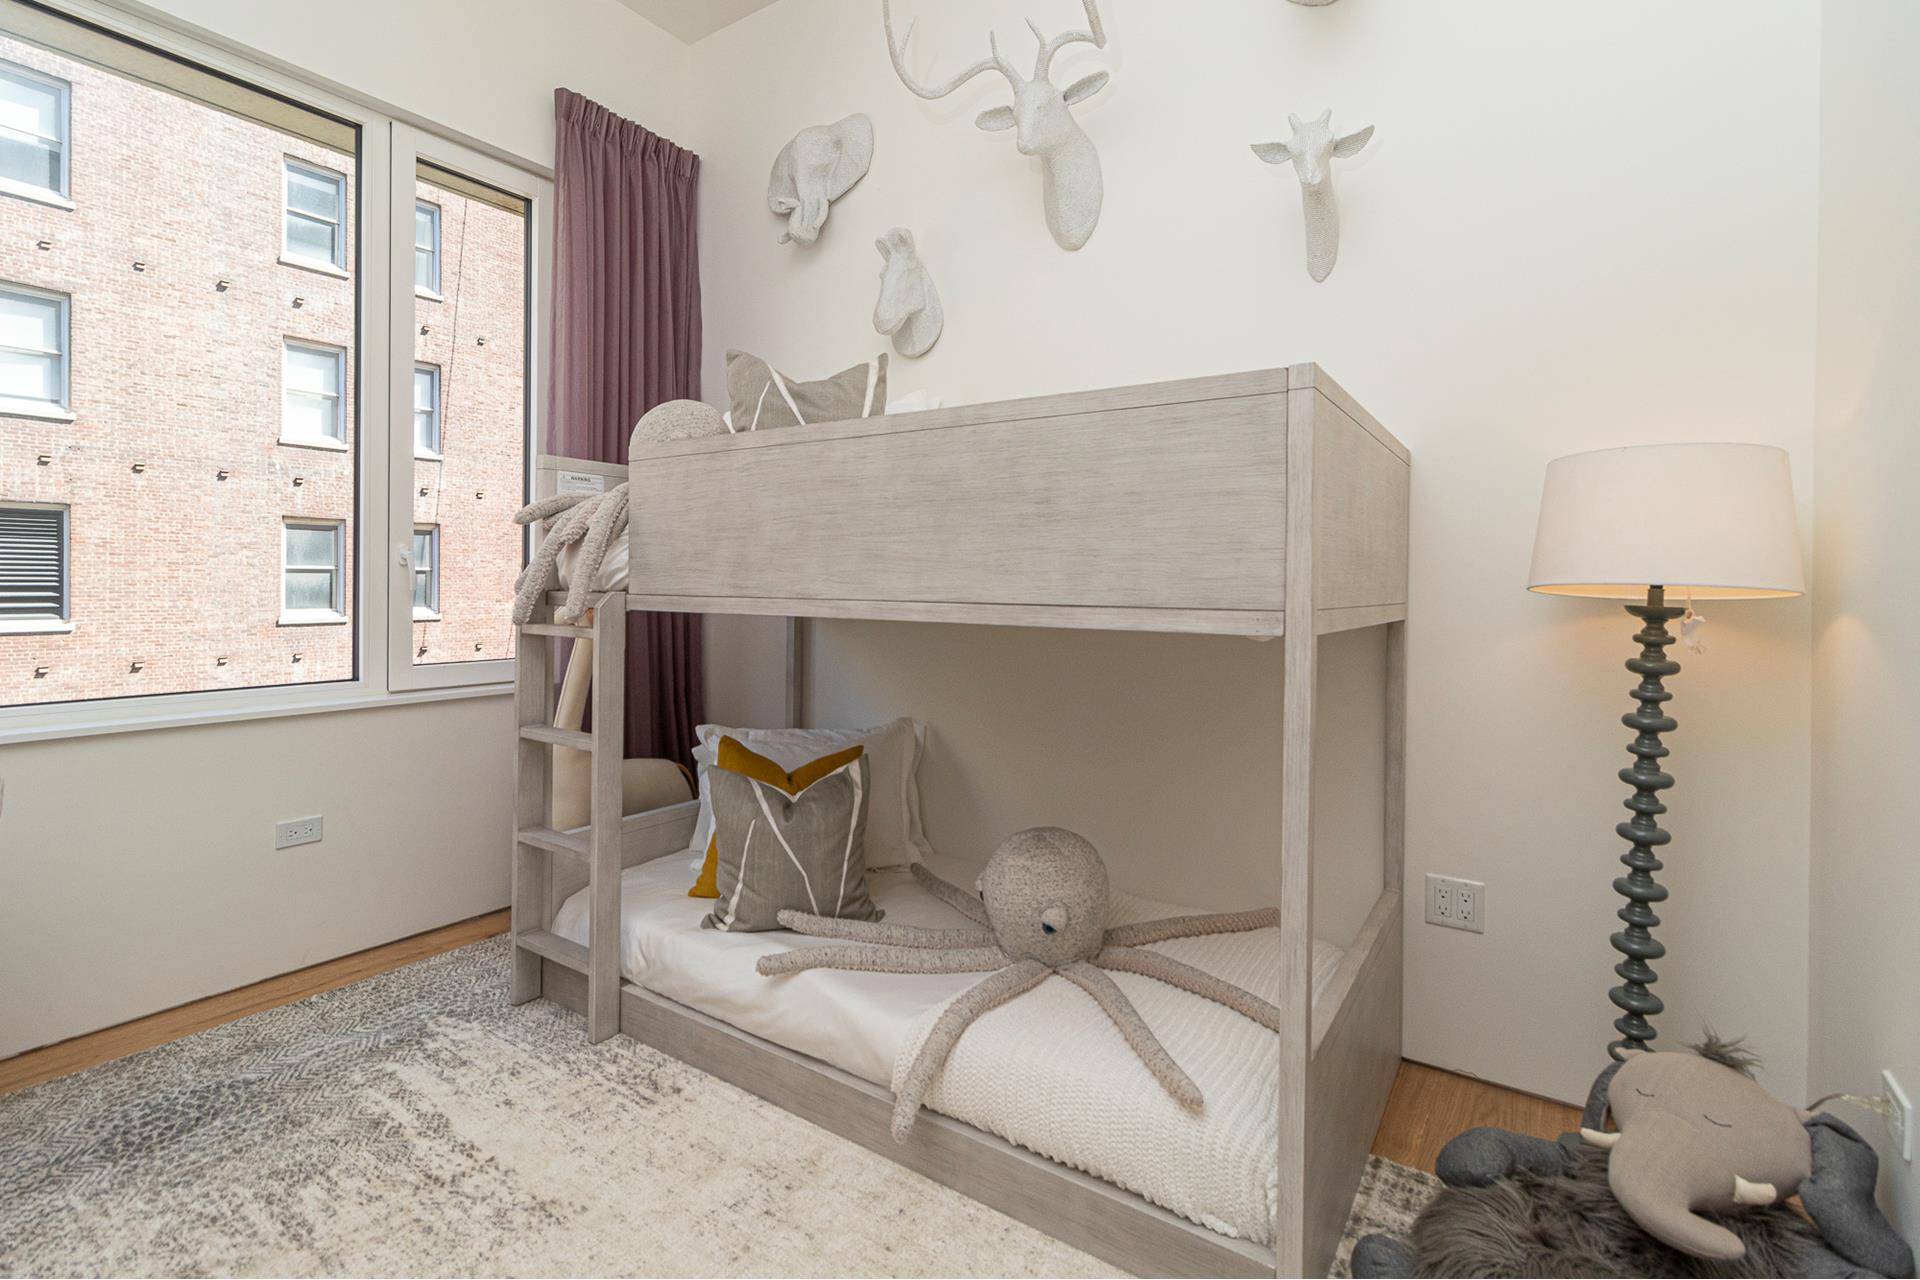 IMMEDIATE OCCUPANCY Residence 4 at 532 West 20th Street is an exquisitely crafted 2, 662 SF full floor, 4 Bedroom, 3 Full Bath and Half Bath featuring a 155 SF ...